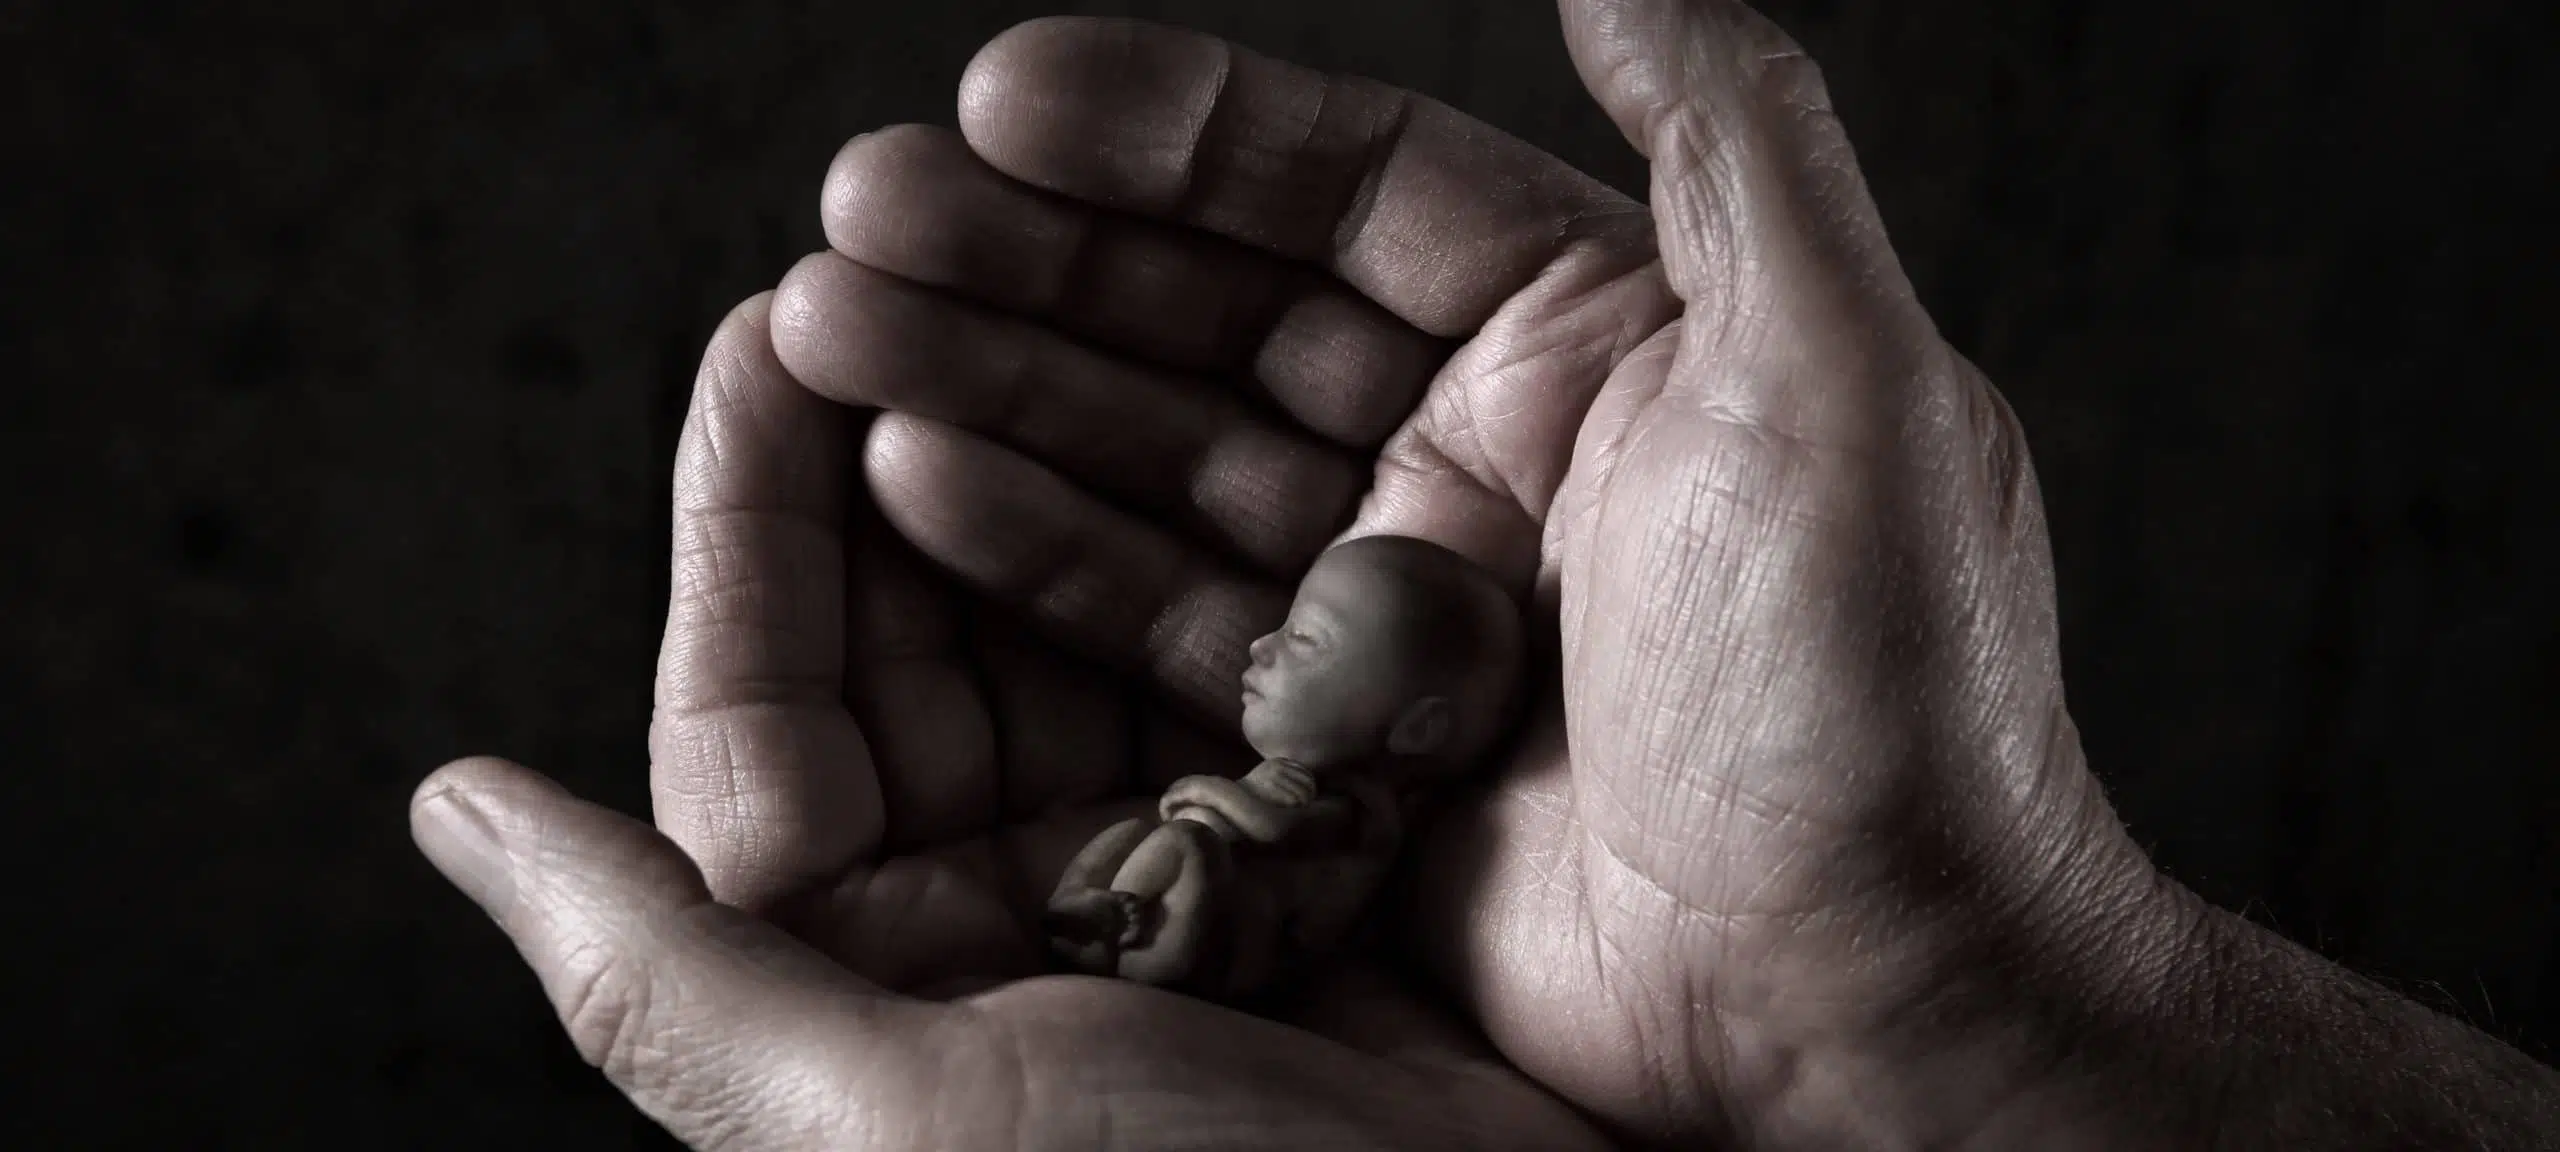 Male hands cradling a small fetus